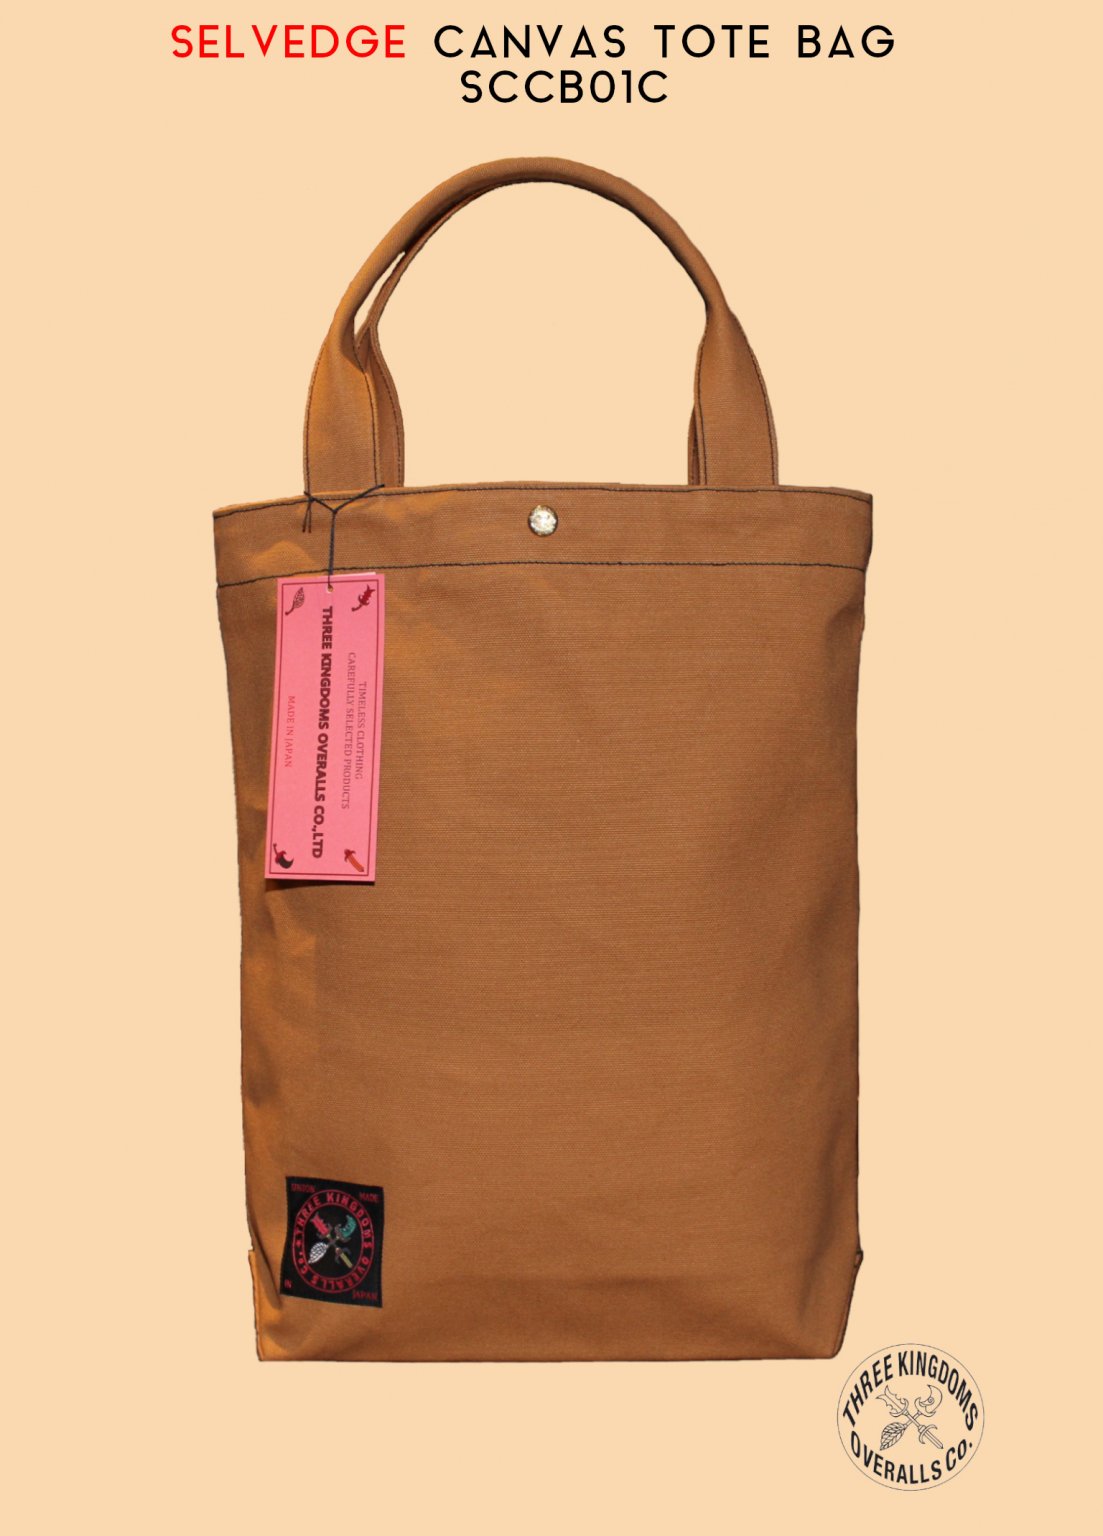 SCCB01C SELVEDGE COTTON CANVAS TOTE BAG<img class='new_mark_img2' src='https://img.shop-pro.jp/img/new/icons14.gif' style='border:none;display:inline;margin:0px;padding:0px;width:auto;' />